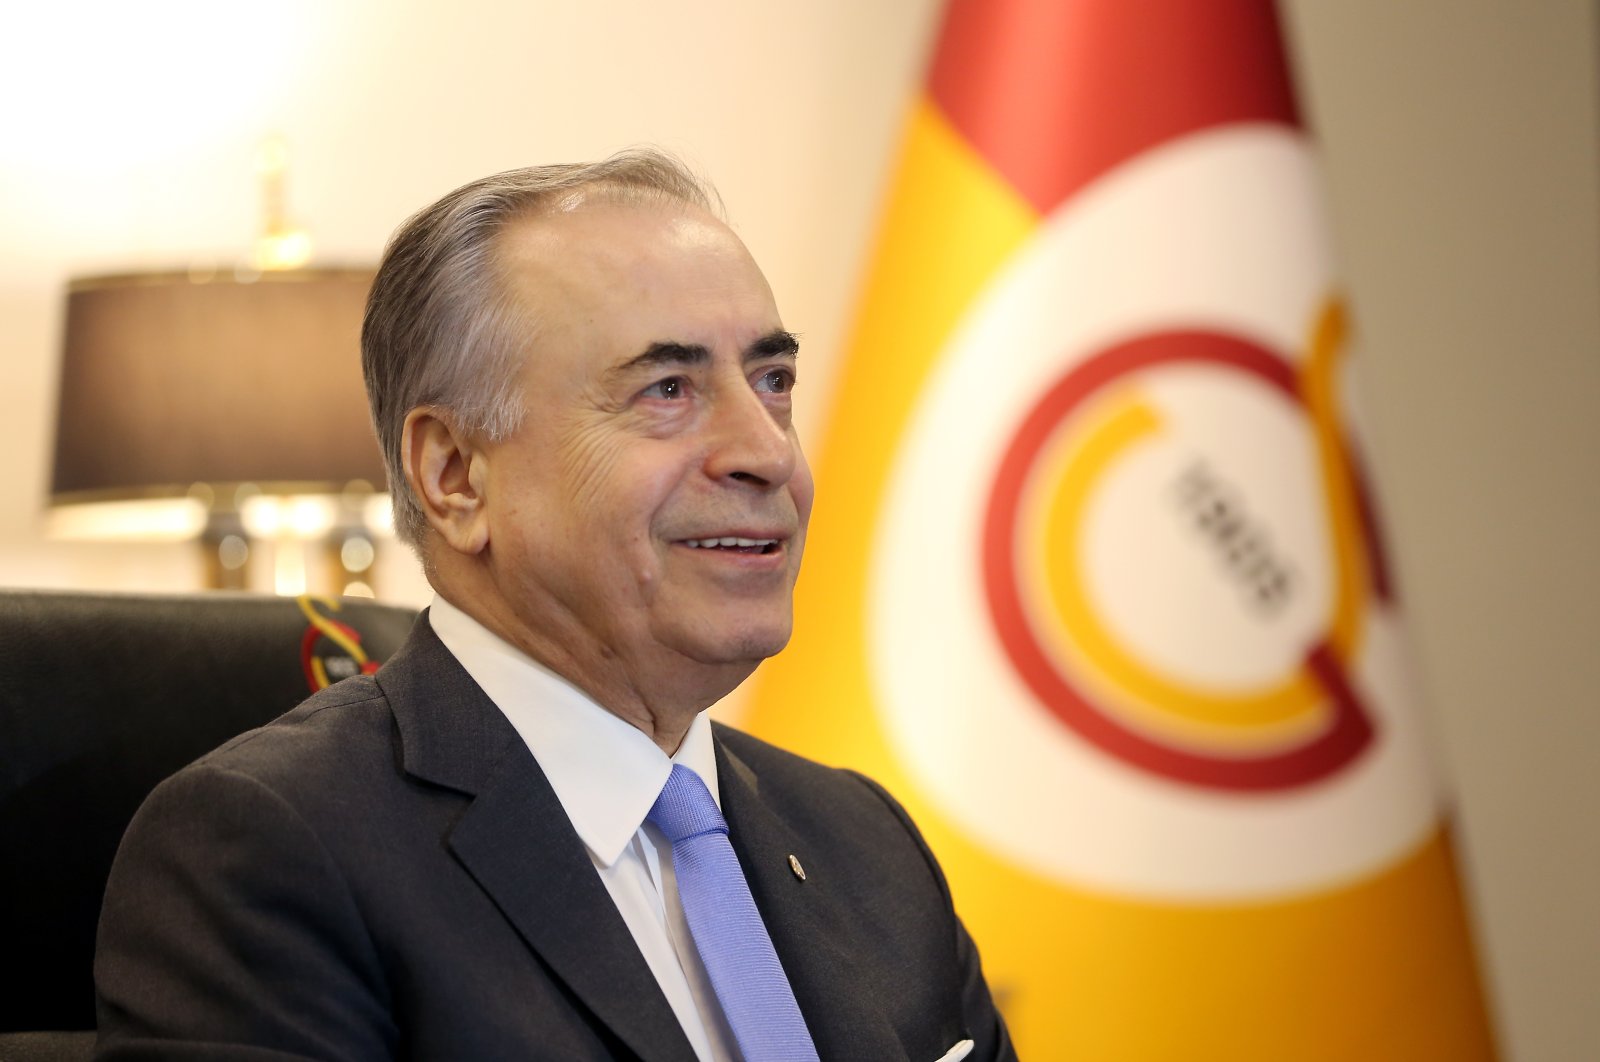 Former Galatasaray chairperson, Mustafa Cengiz, speaks to reporters in this undated file photo. (AA File Photo)